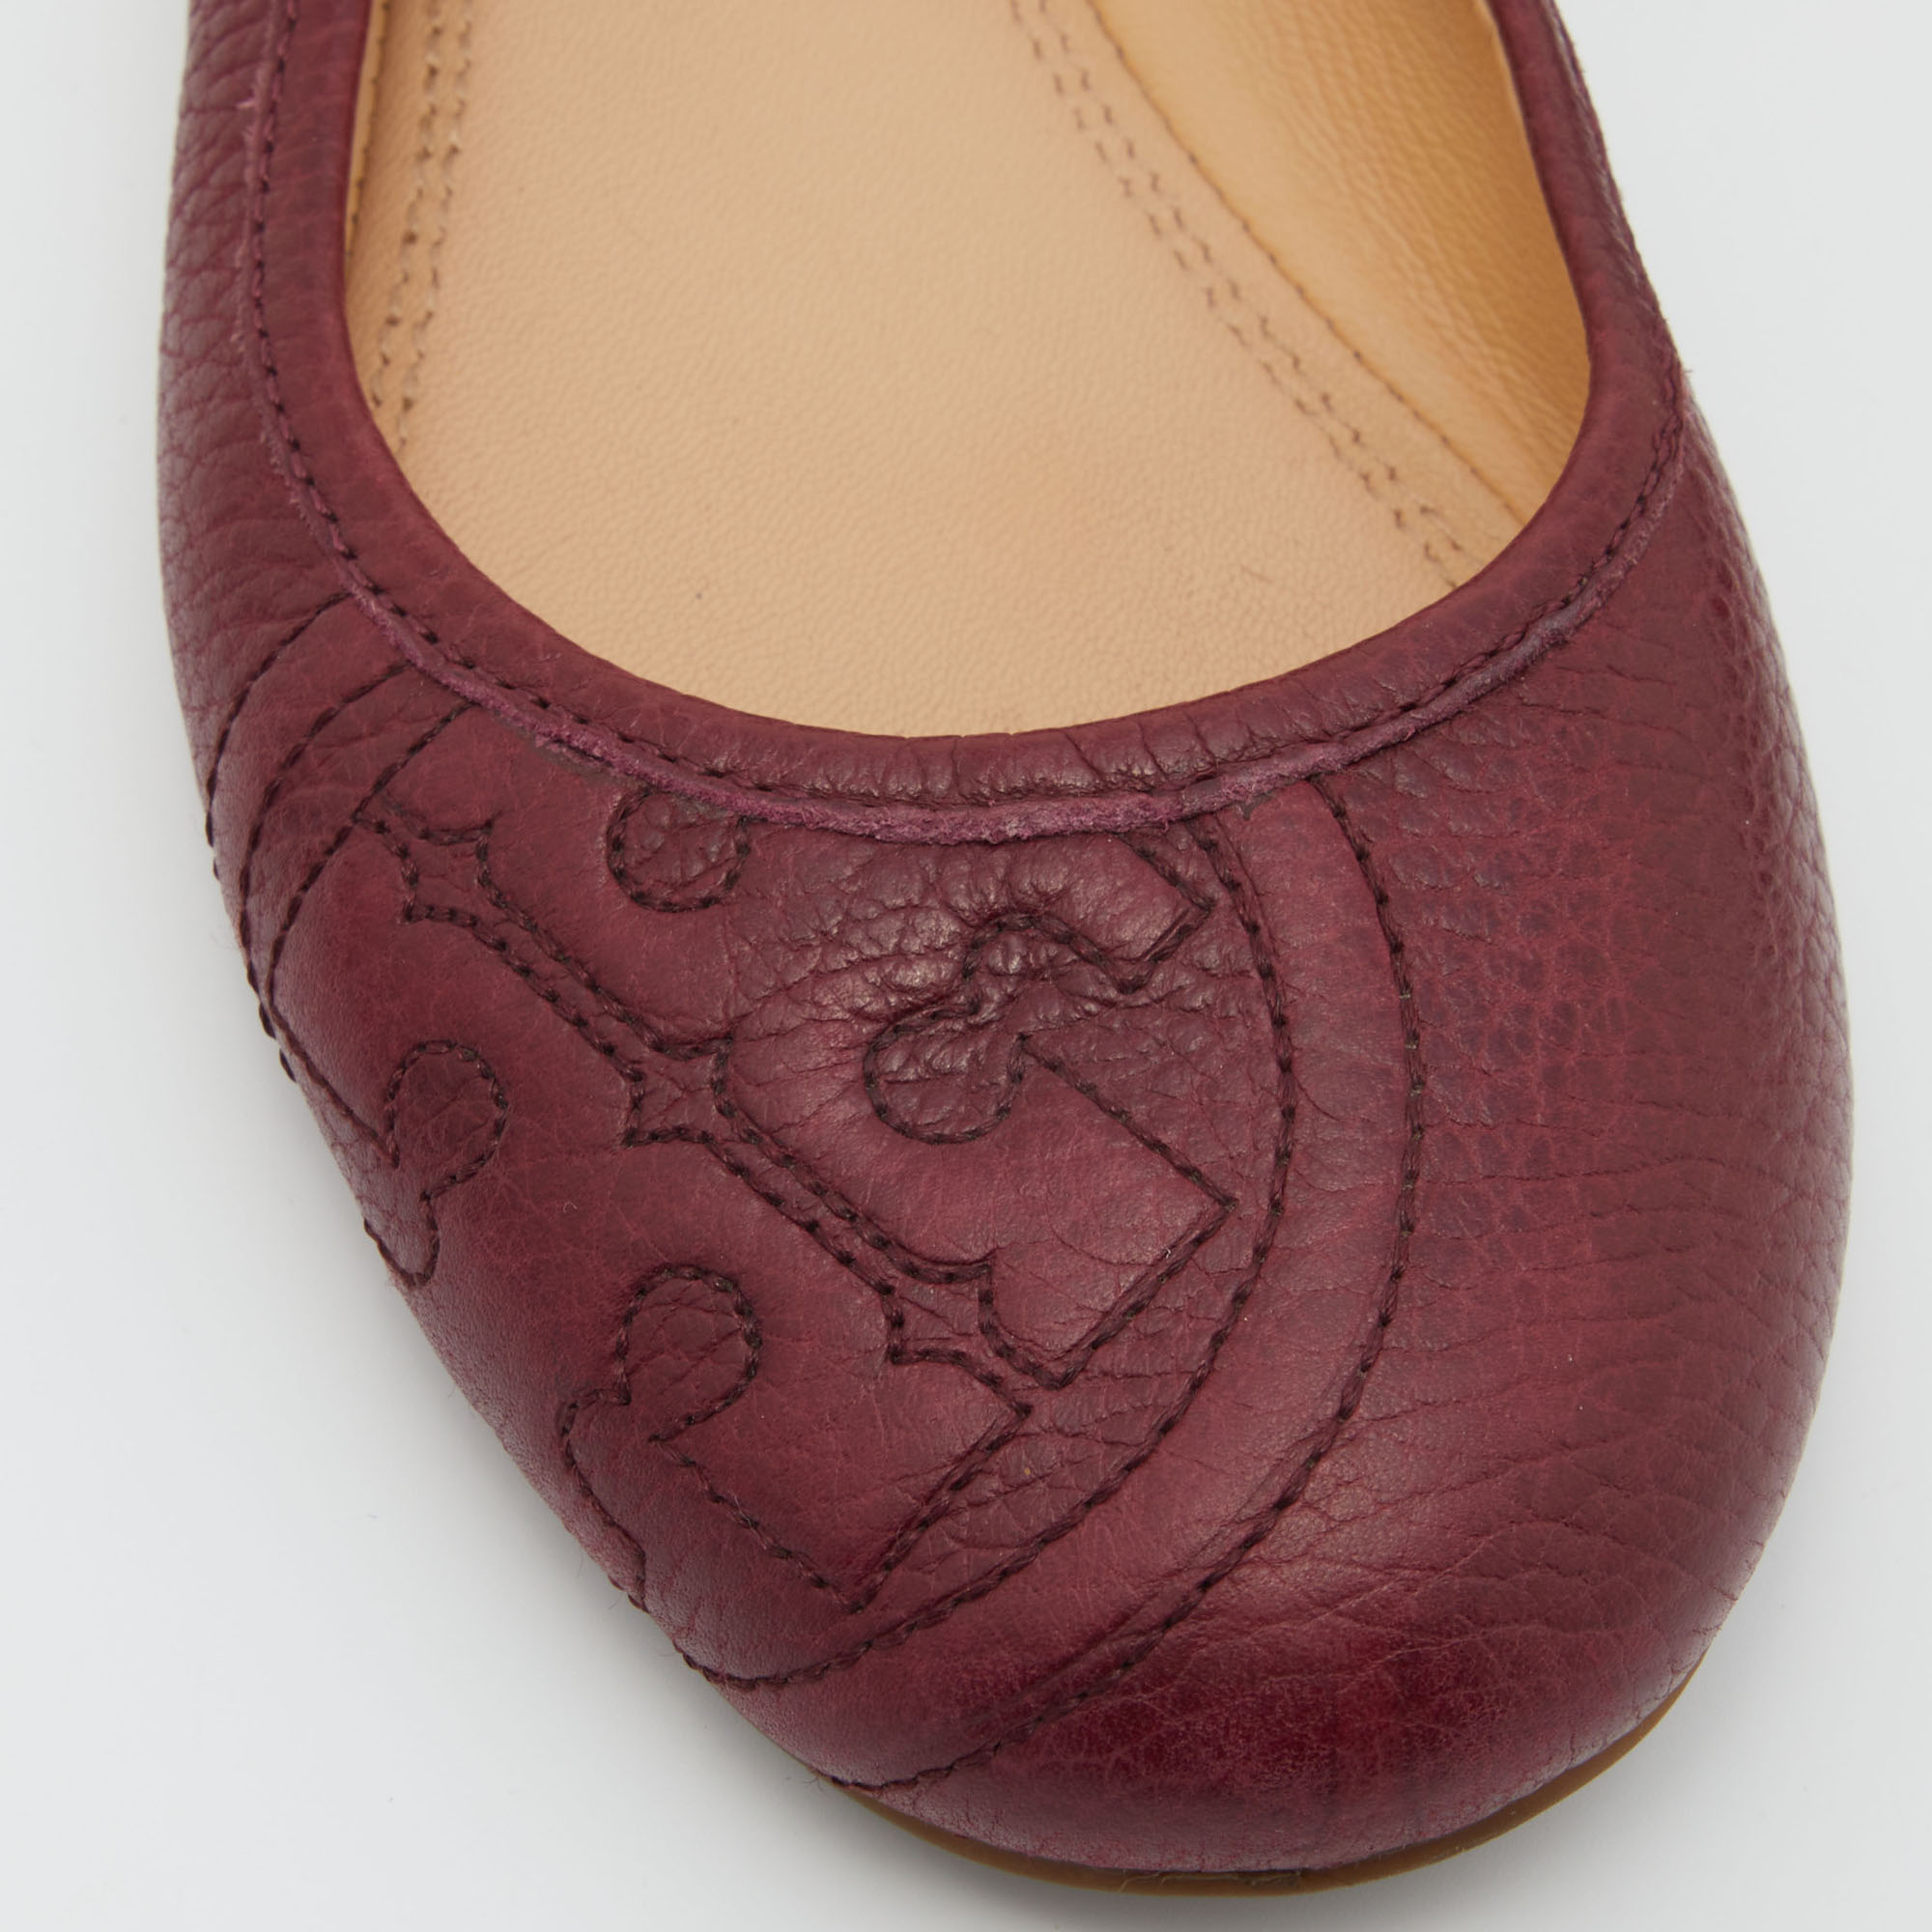 Tory Burch Burgundy Leather Ballet Flats Size 36.5